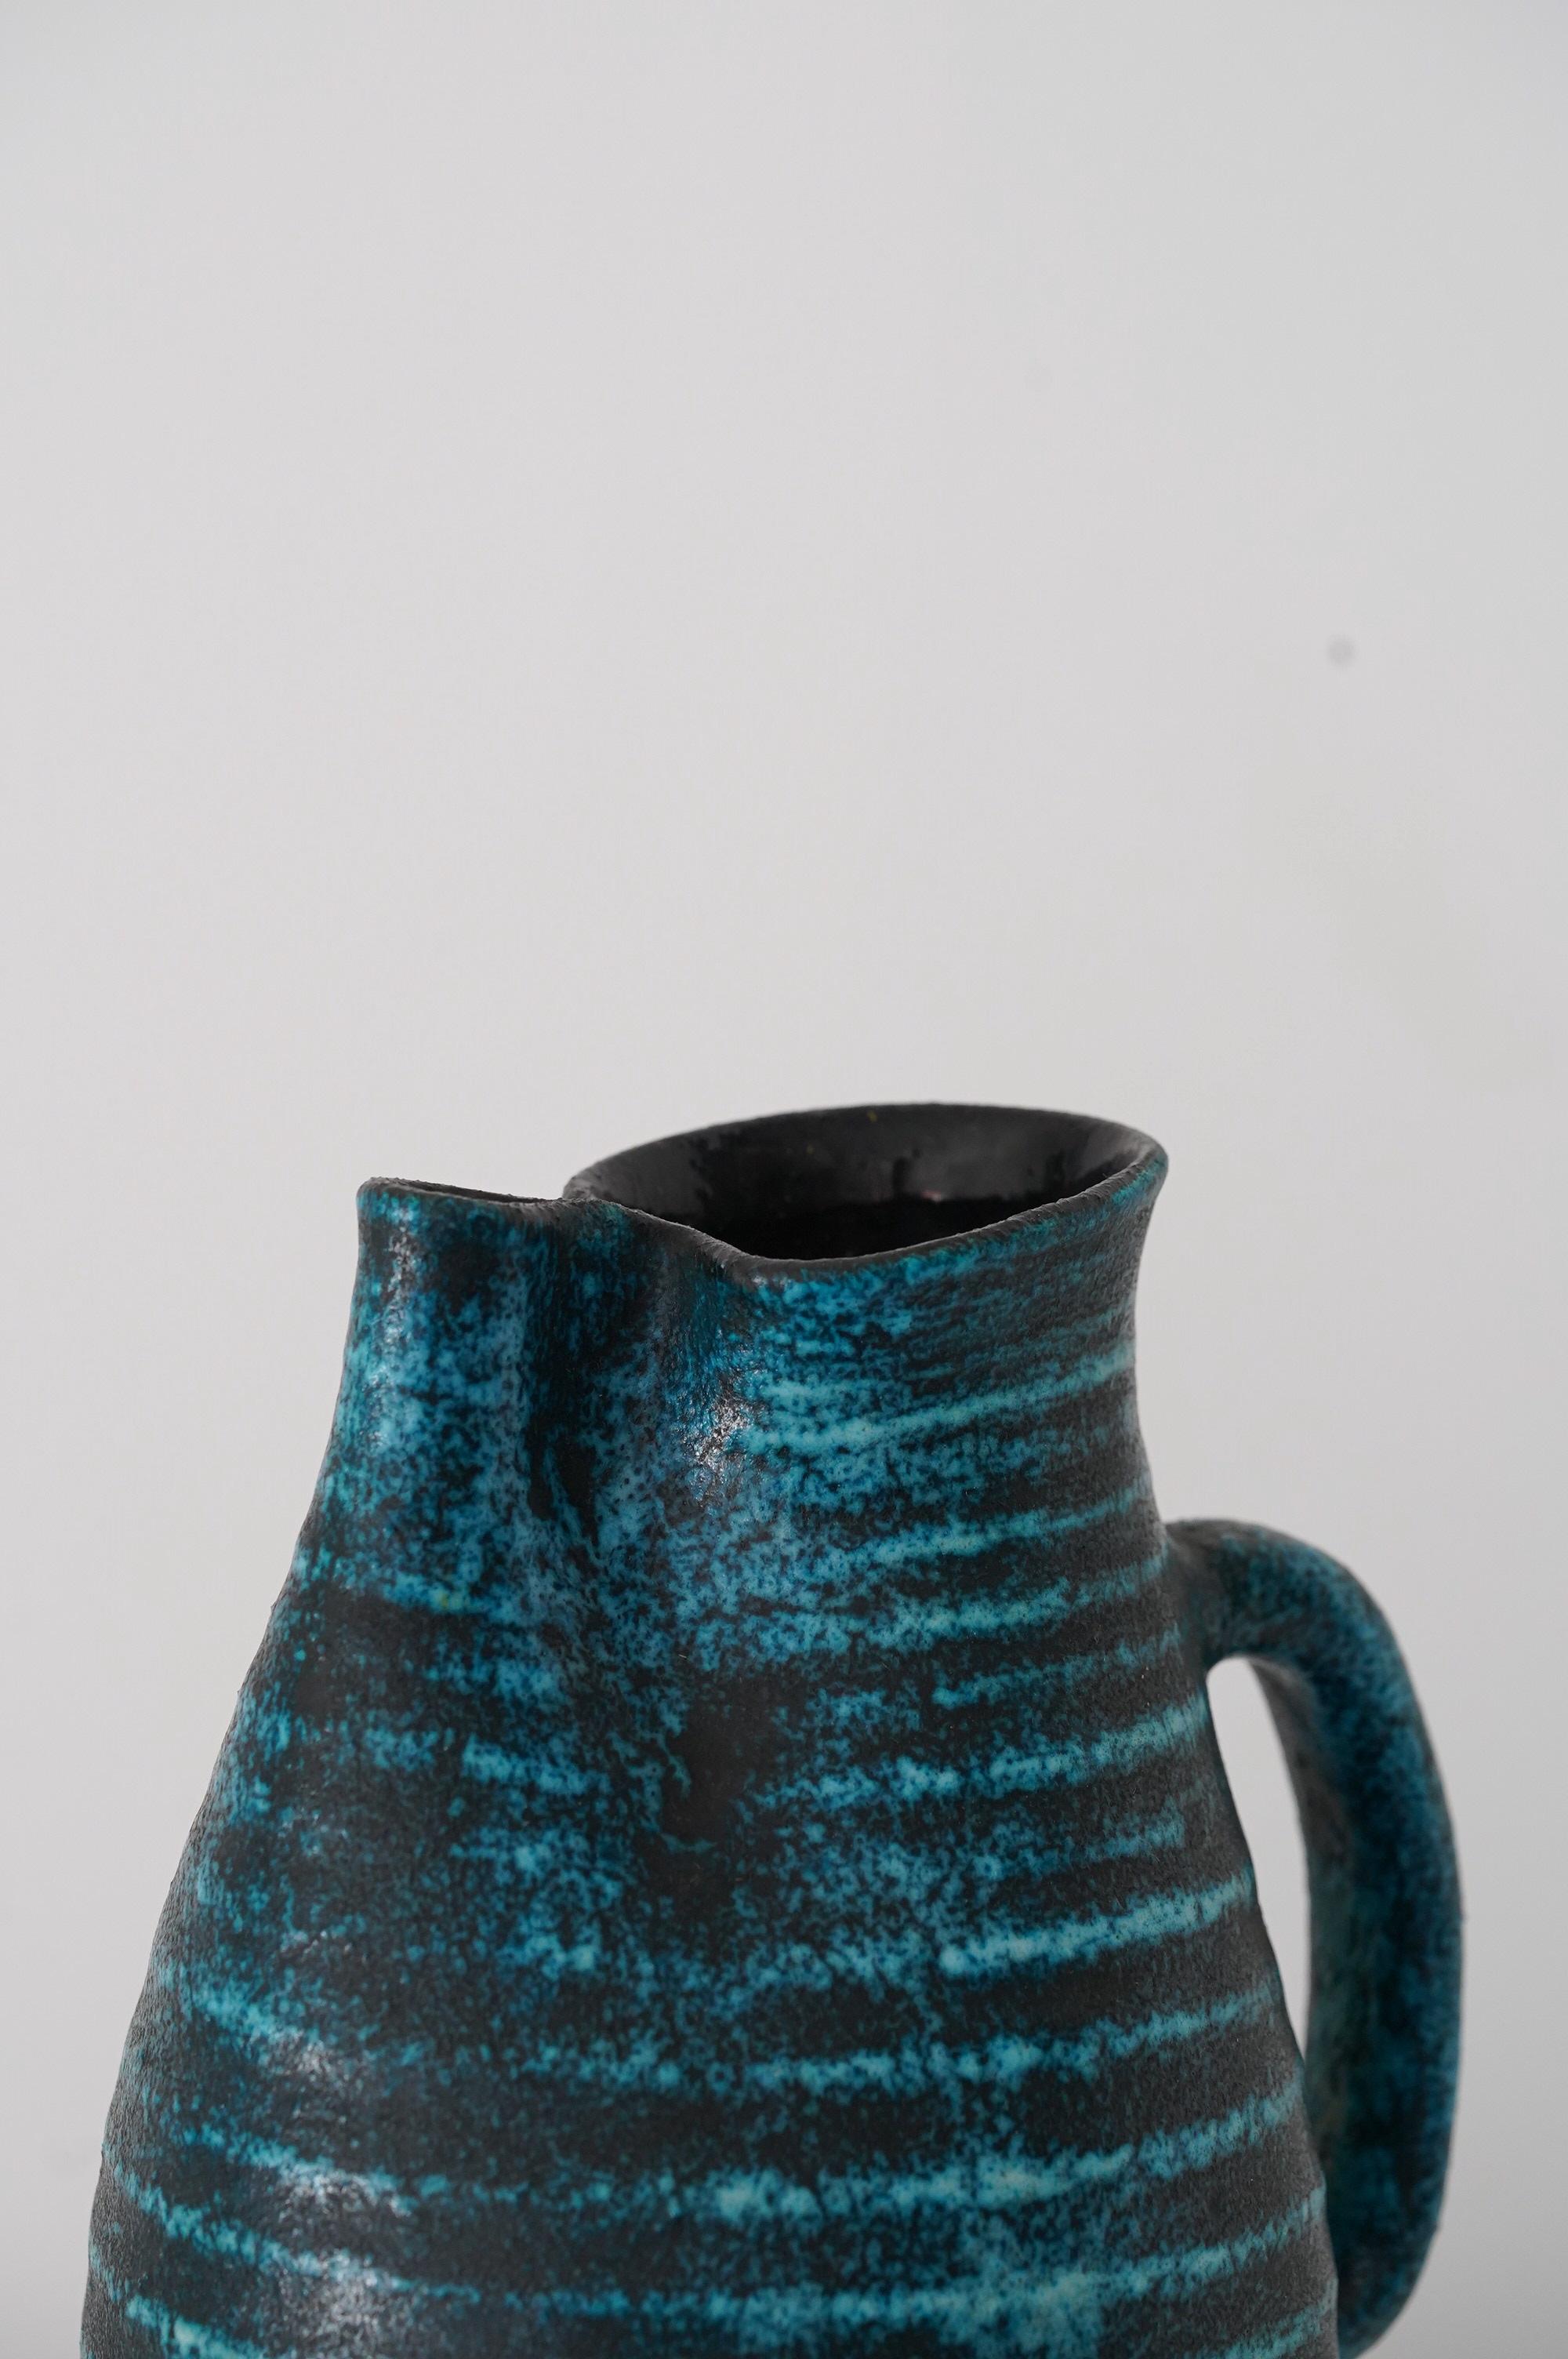 Accolay Freeform Blue Ceramic Pitcher, France 1950s For Sale 2